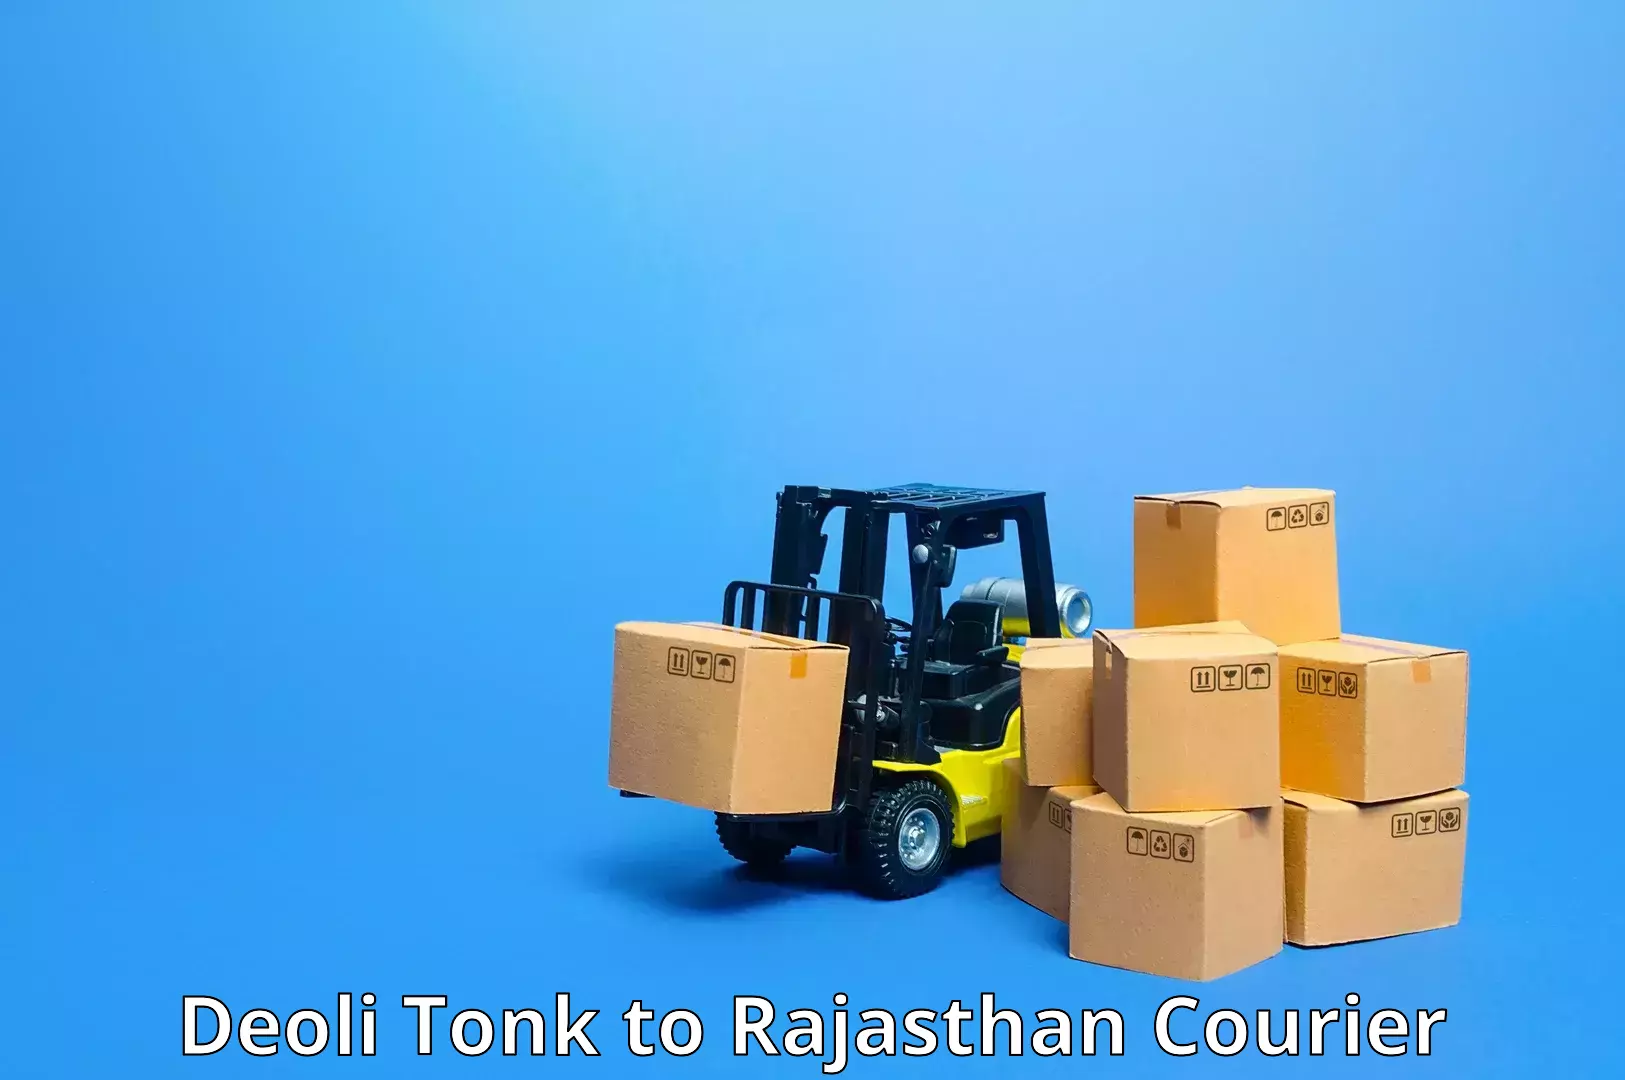 High value parcel delivery Deoli Tonk to Udaipurwati